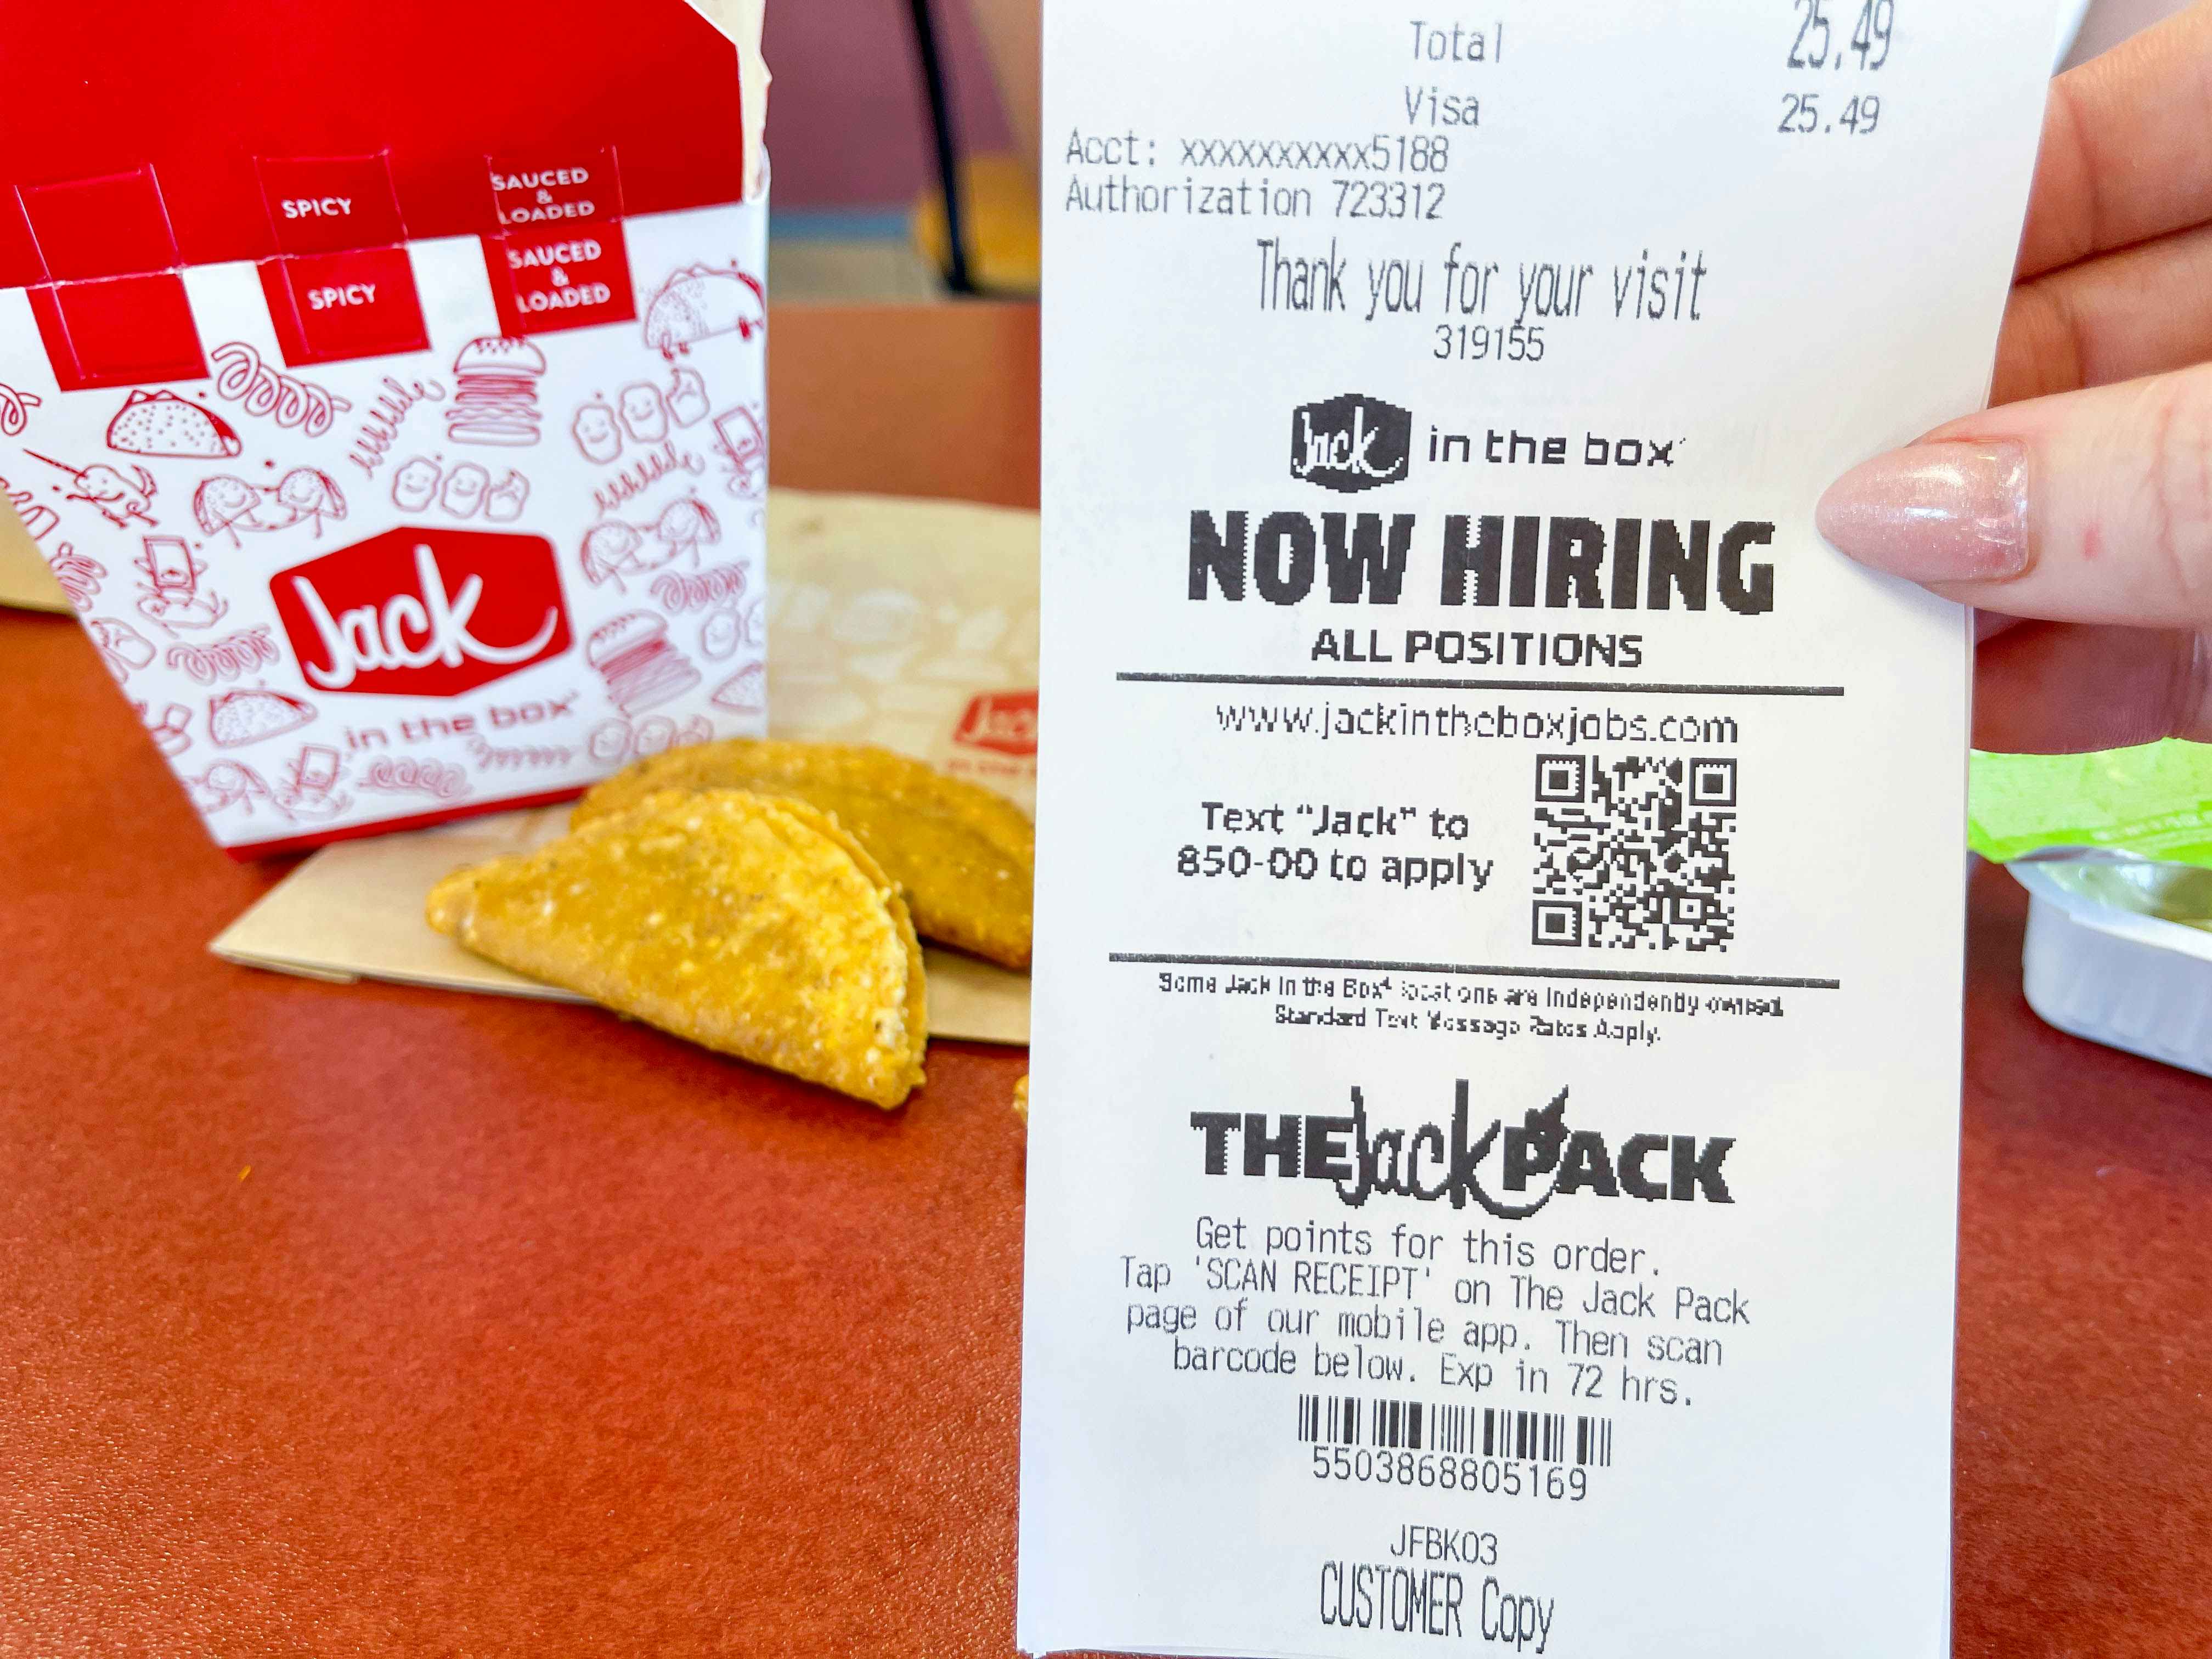 now hiring on receipt next to jack in the box tacos box